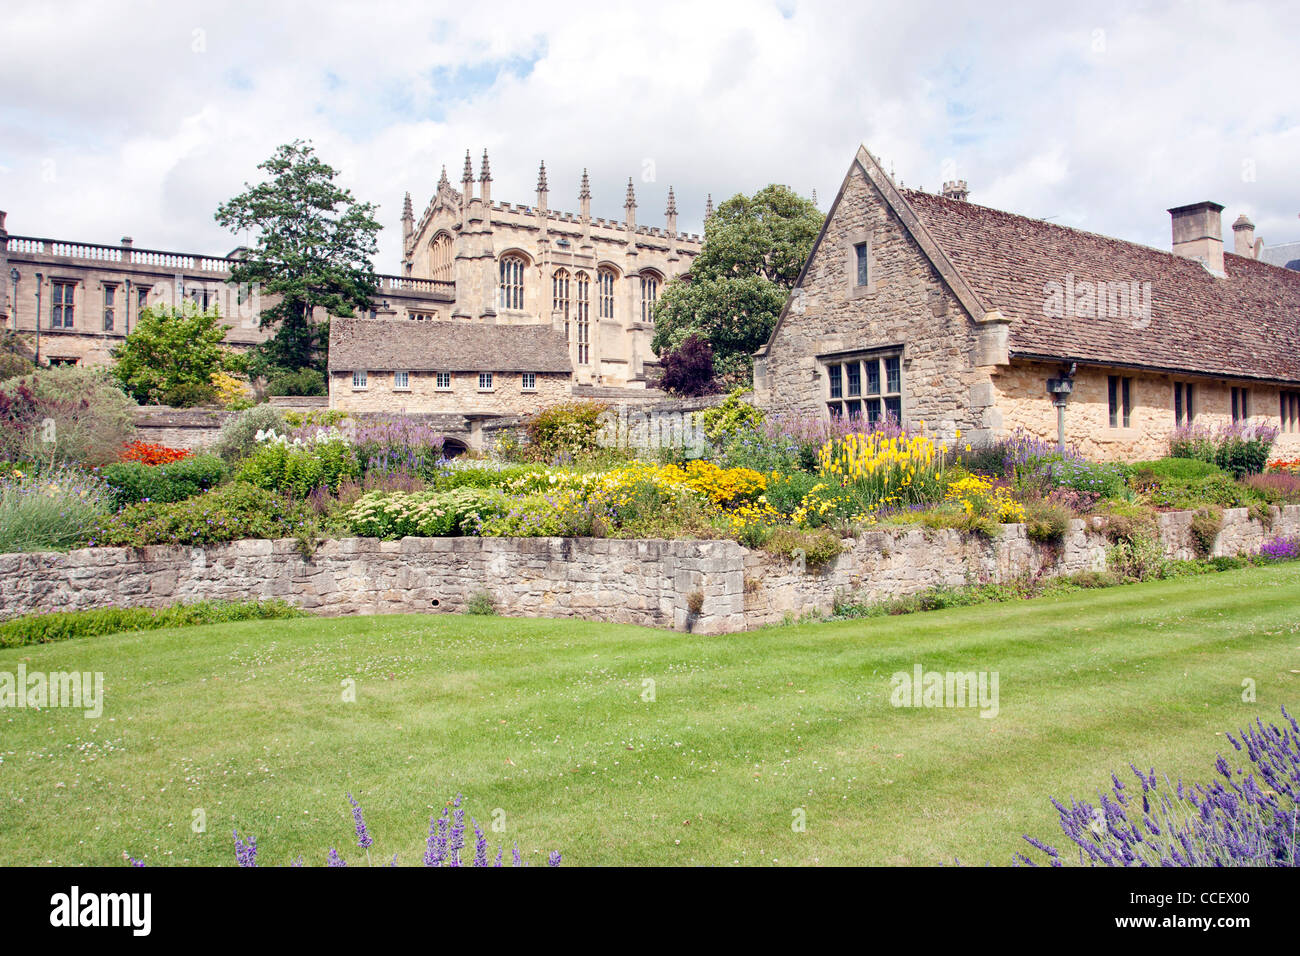 summer gardens with lavendar bushes and old stone cottage in oxford Stock Photo